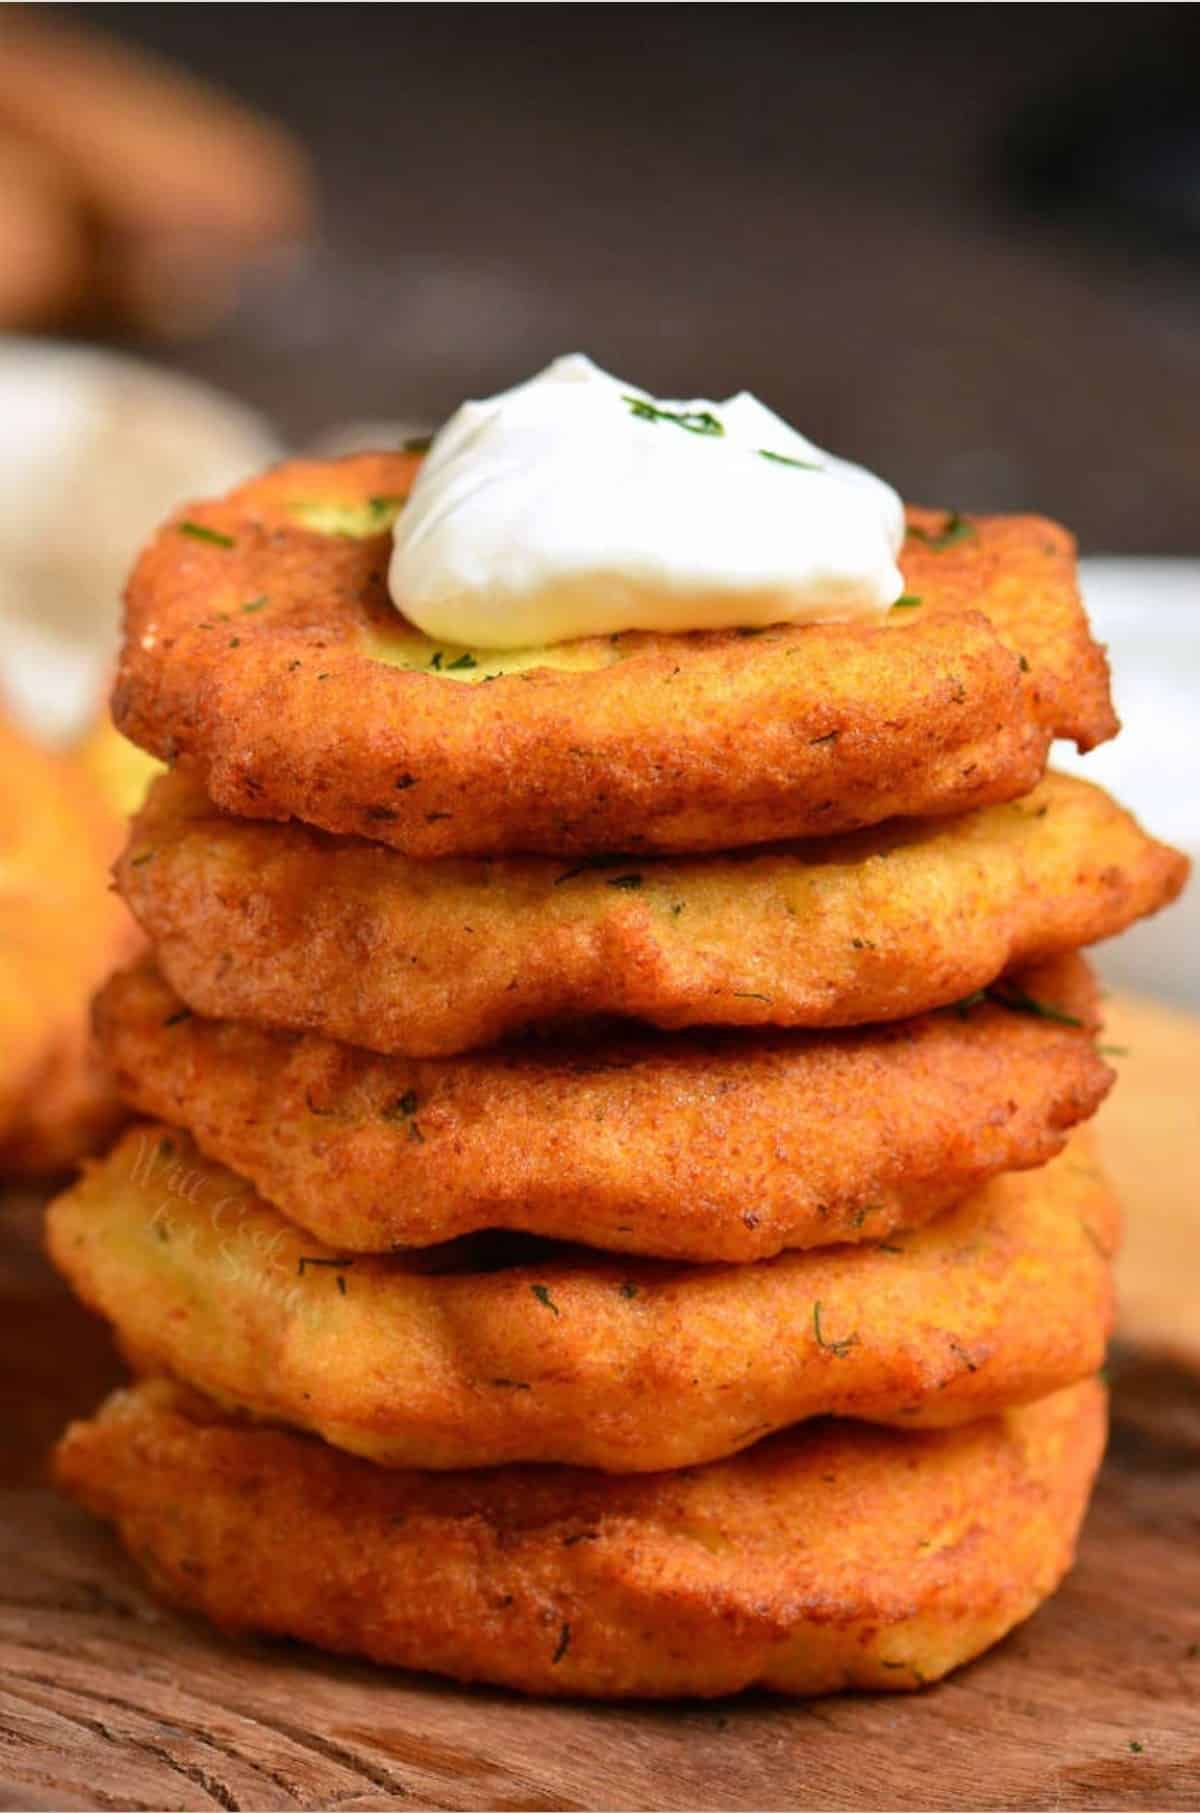 Potato pancakes on stacked on a wood surface with a dollop of sour cream on top.